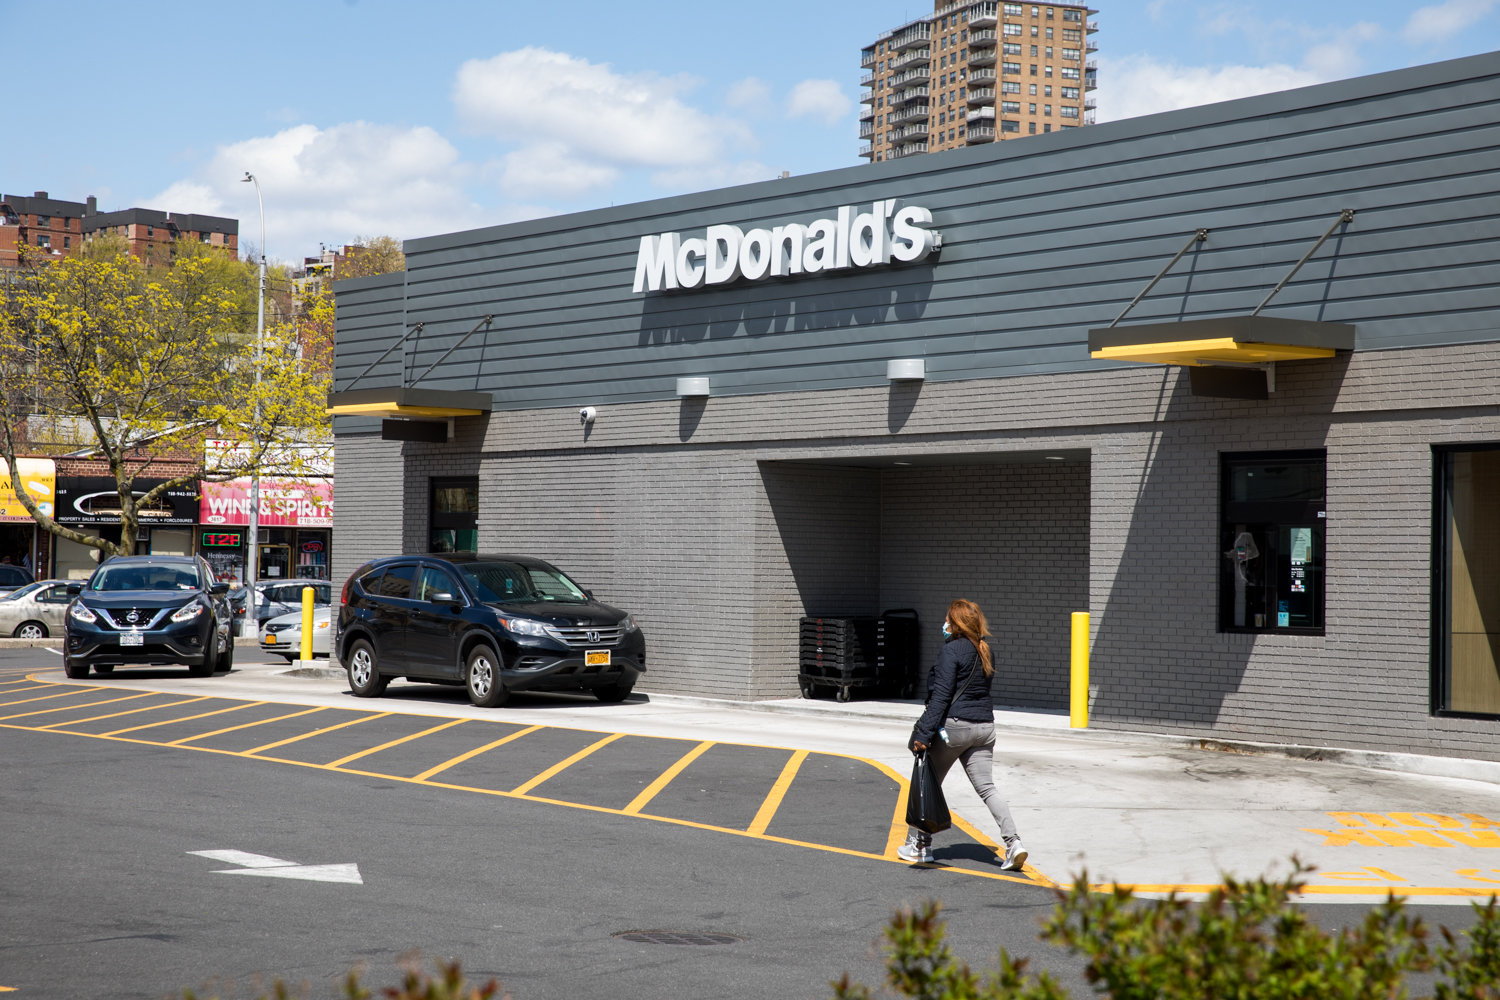 McDonald’s has removed its dine-in option following the advent of the coronavirus pandemic while other restaurants have struggled to keep business up with some closing completely.